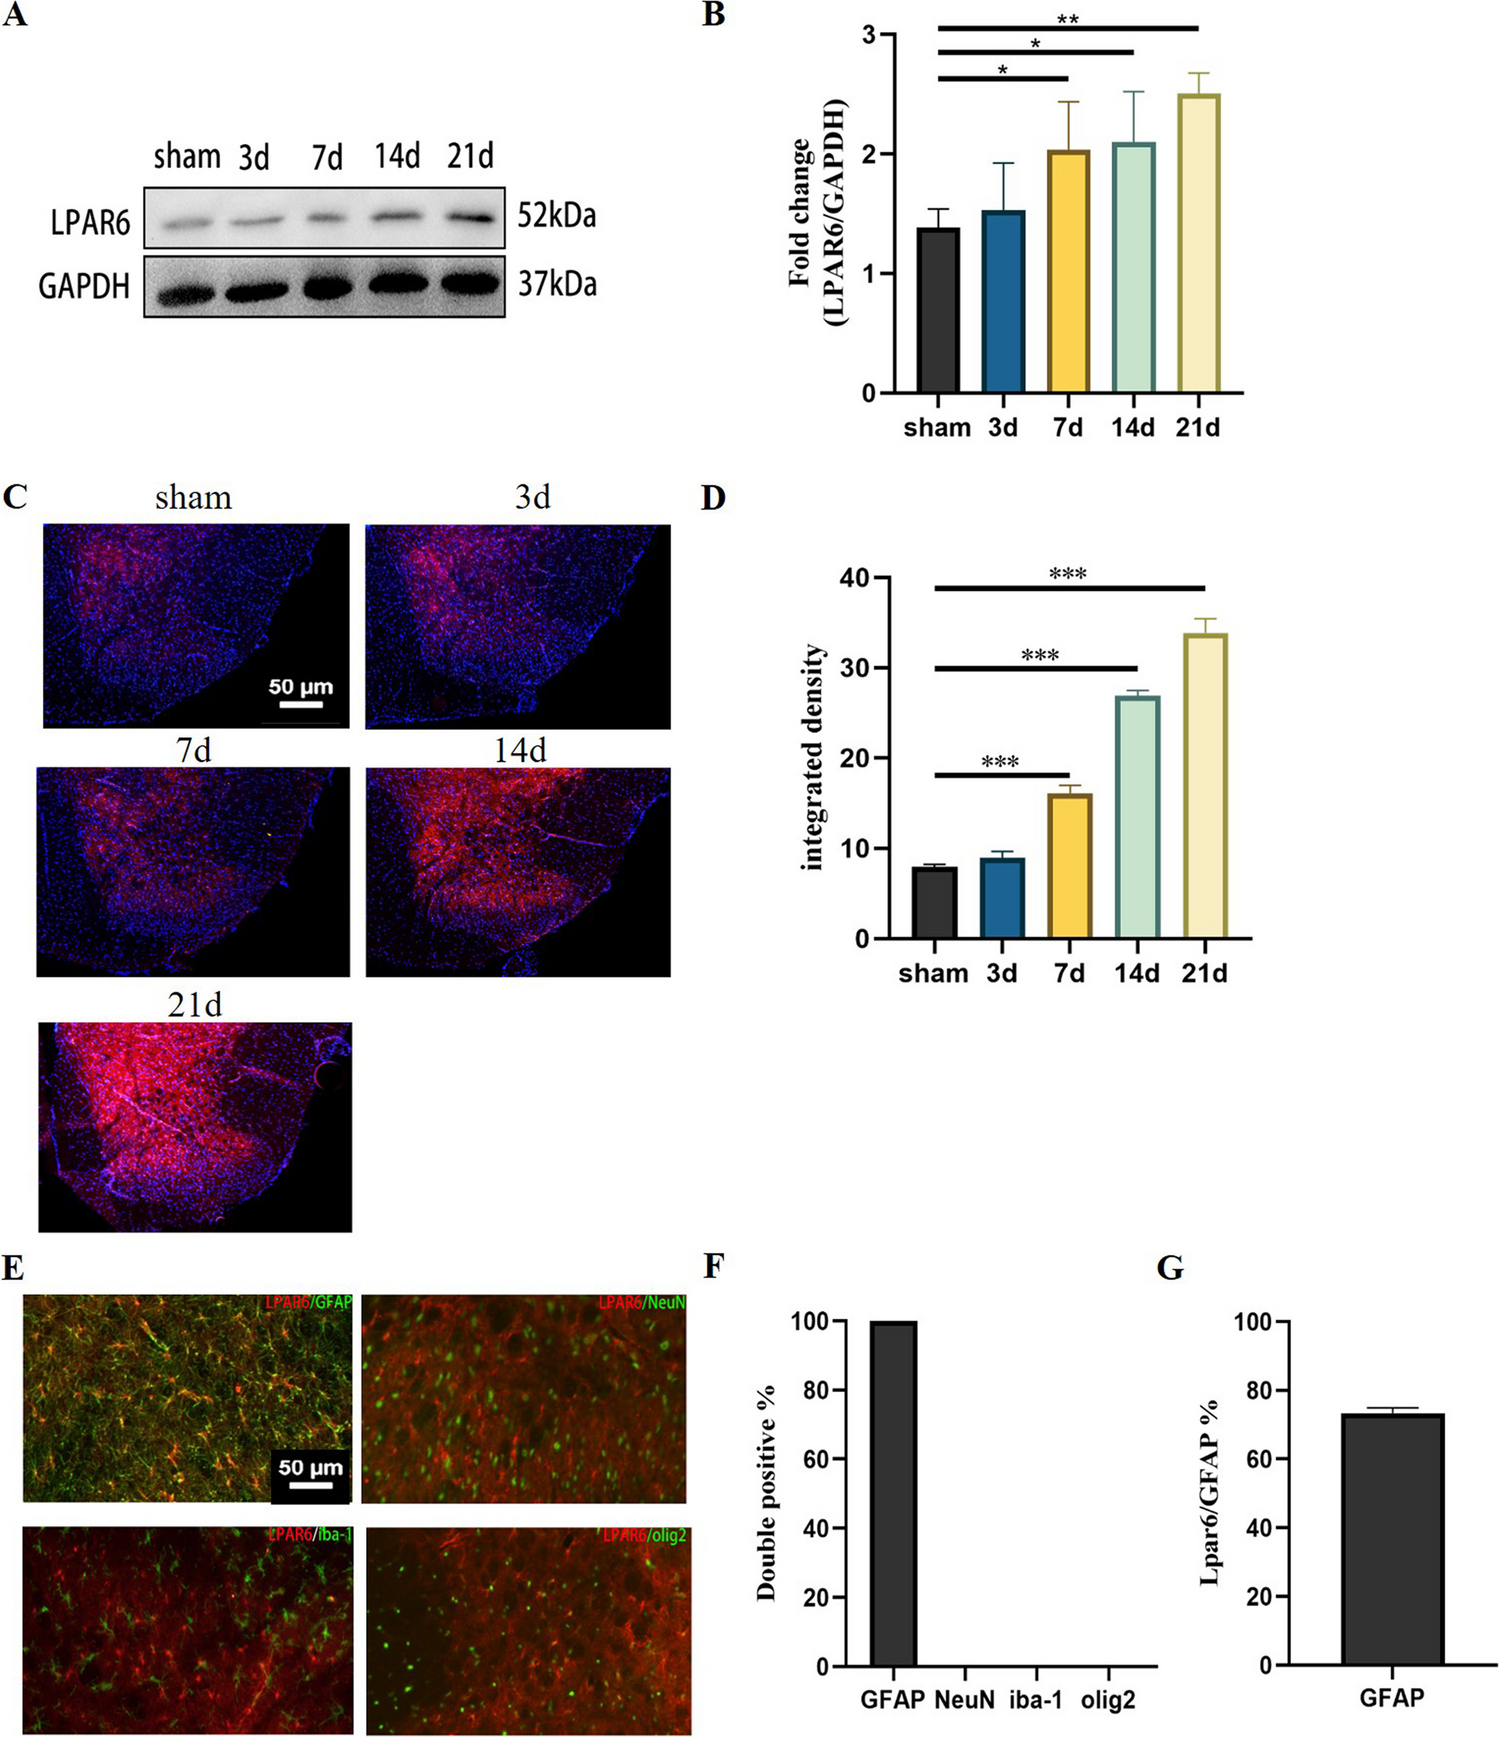 LPAR6 Participates in Neuropathic Pain by Mediating Astrocyte Cells via ROCK2/NF-κB Signal Pathway